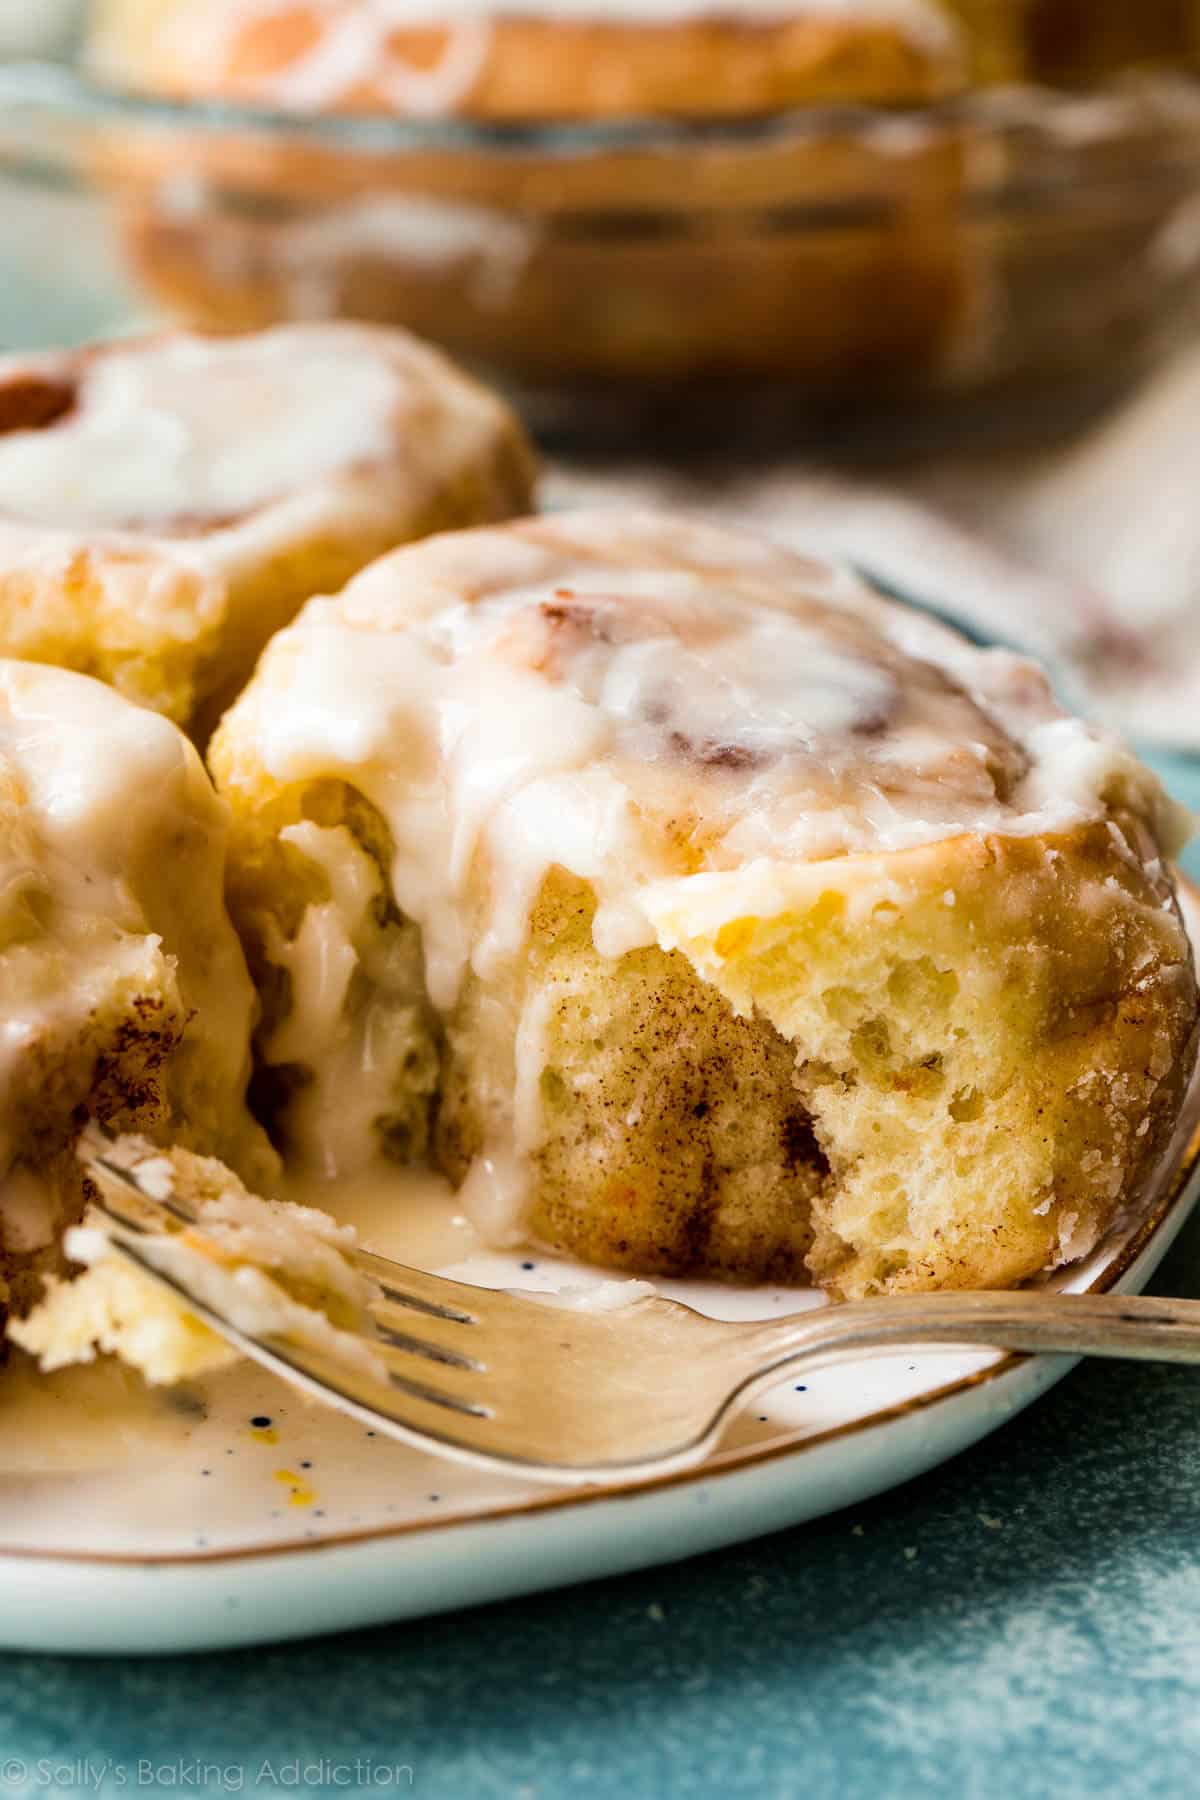 orange sweet rolls on a plate with a fork